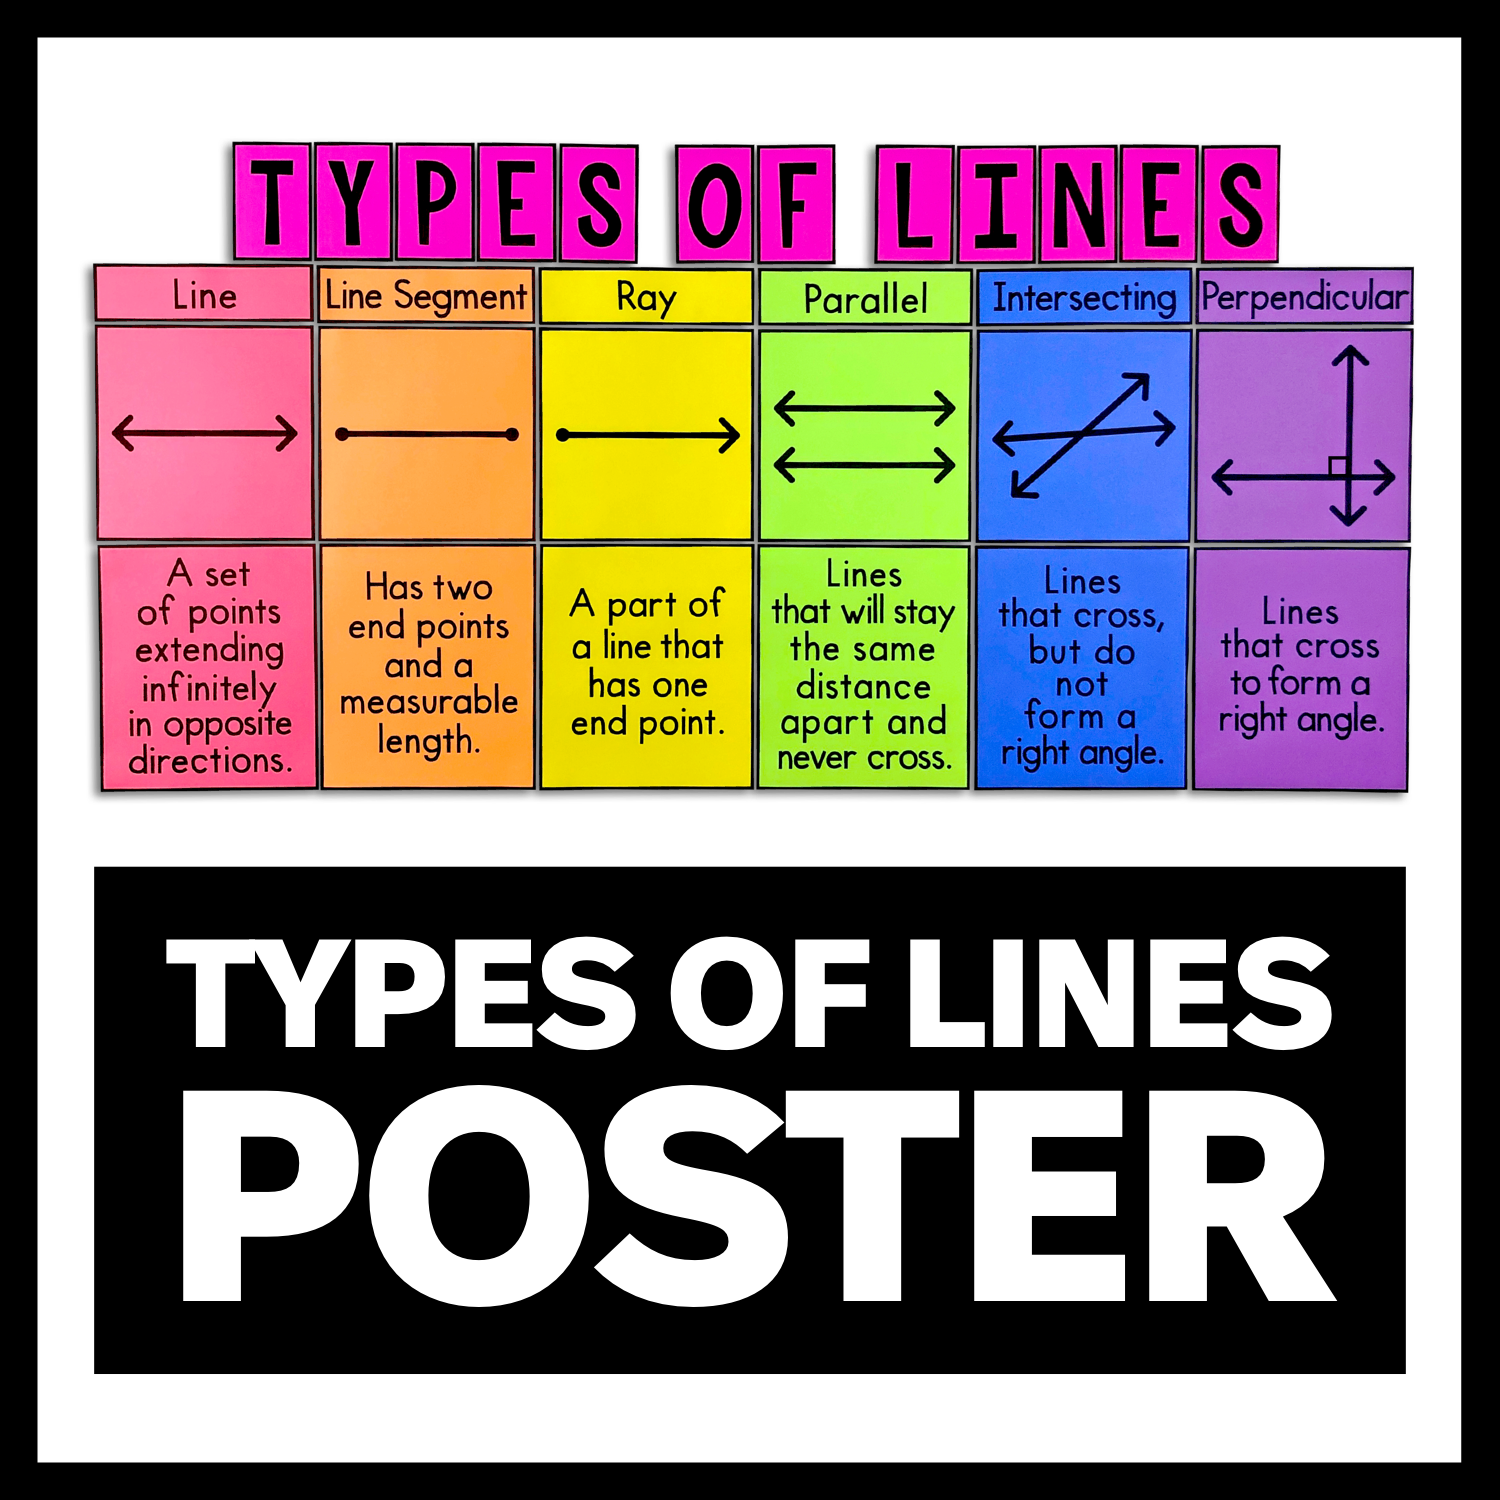 Types of Lines Poster